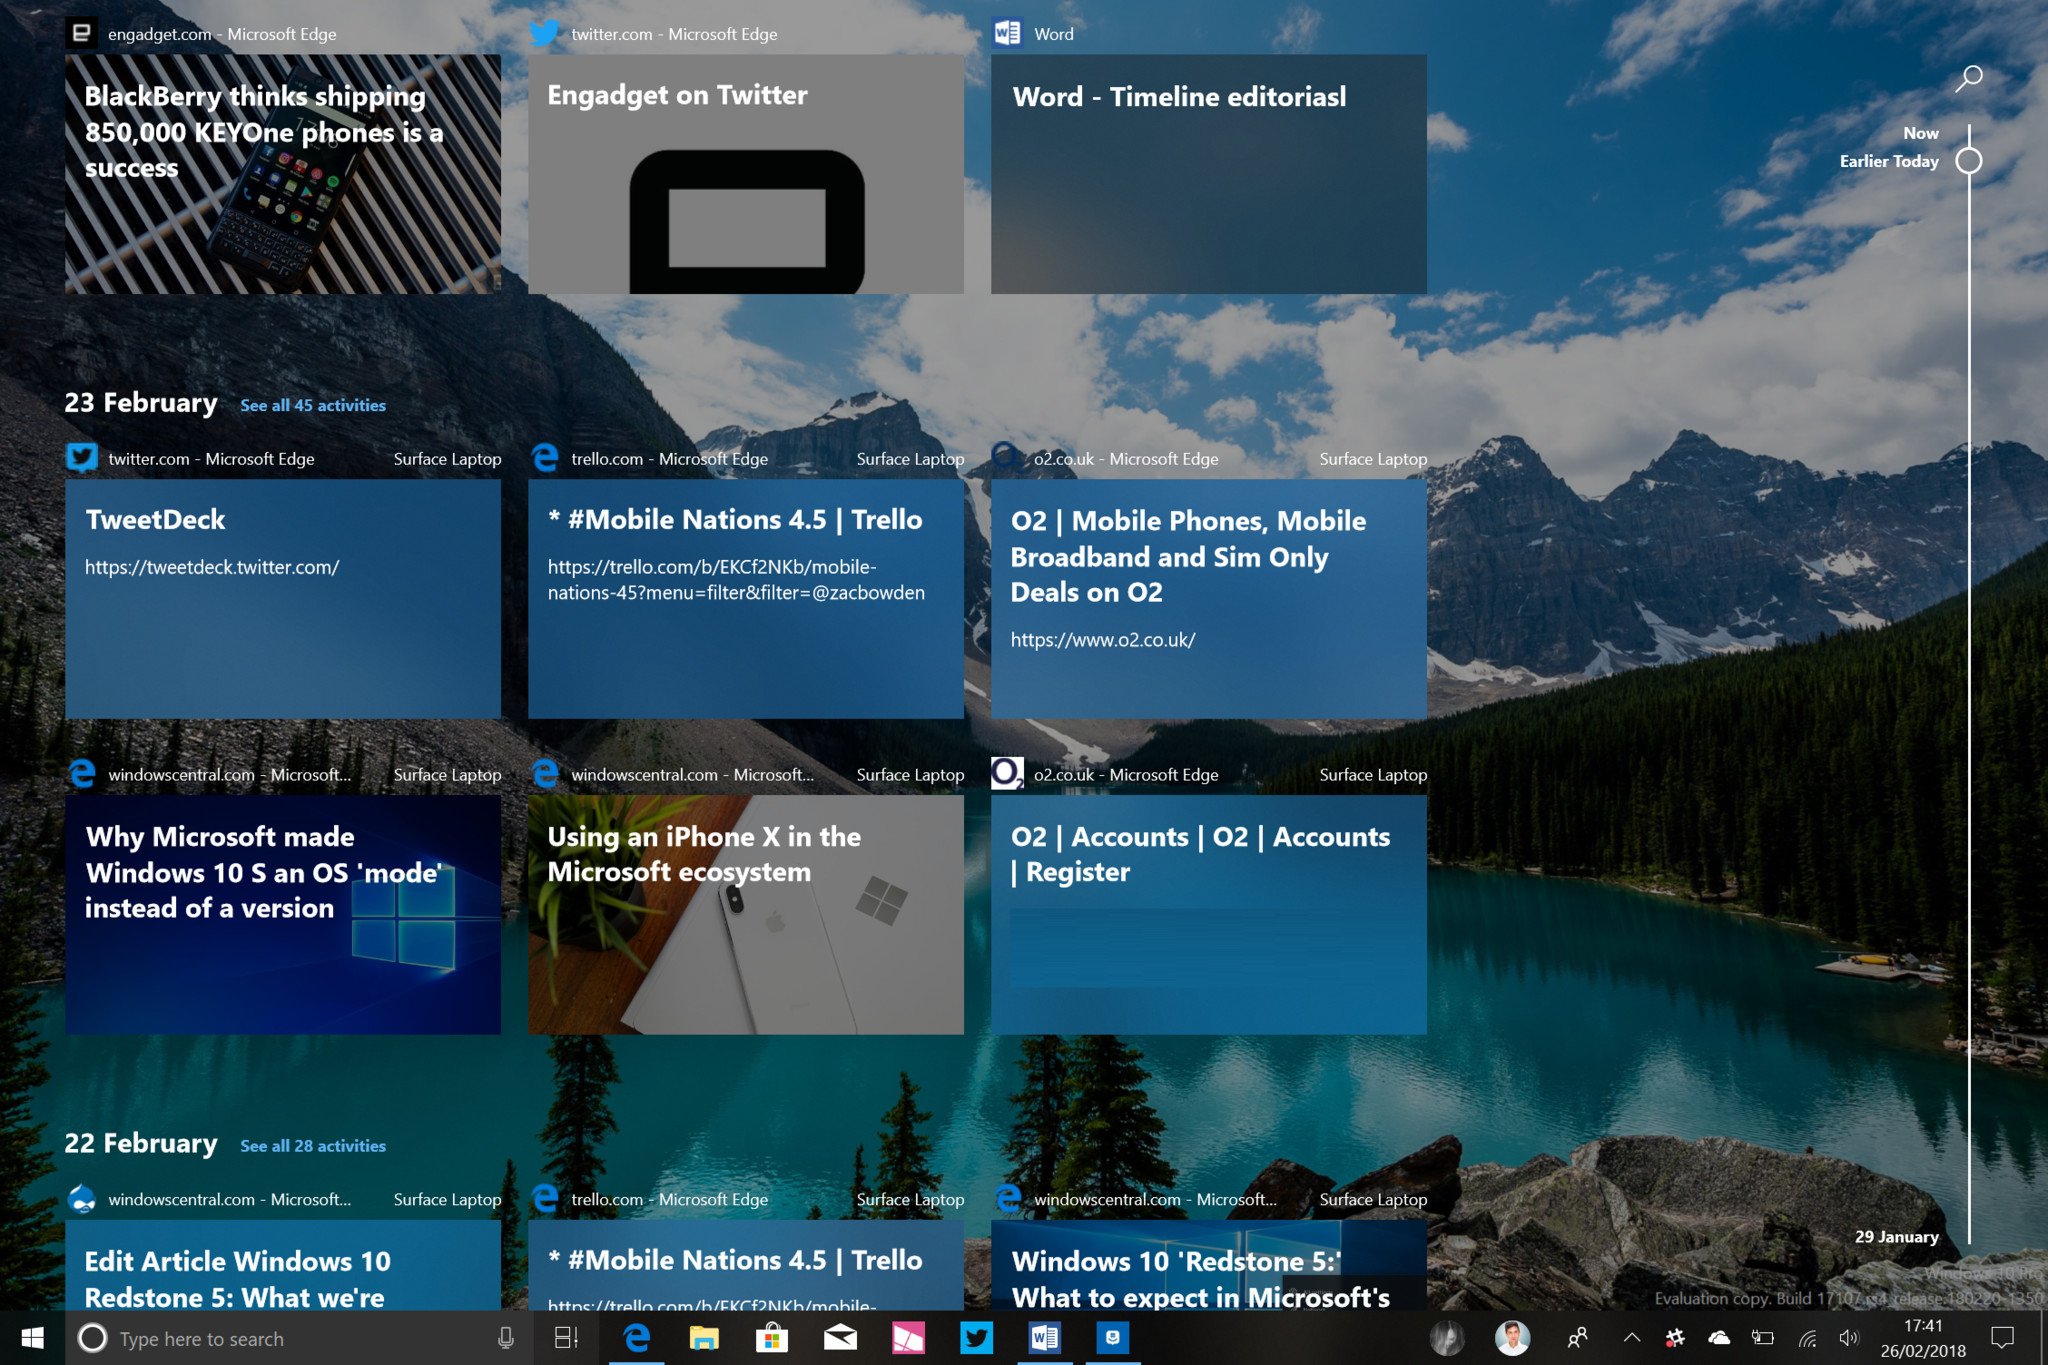 Microsoft is expecting a lot of success from Windows 10